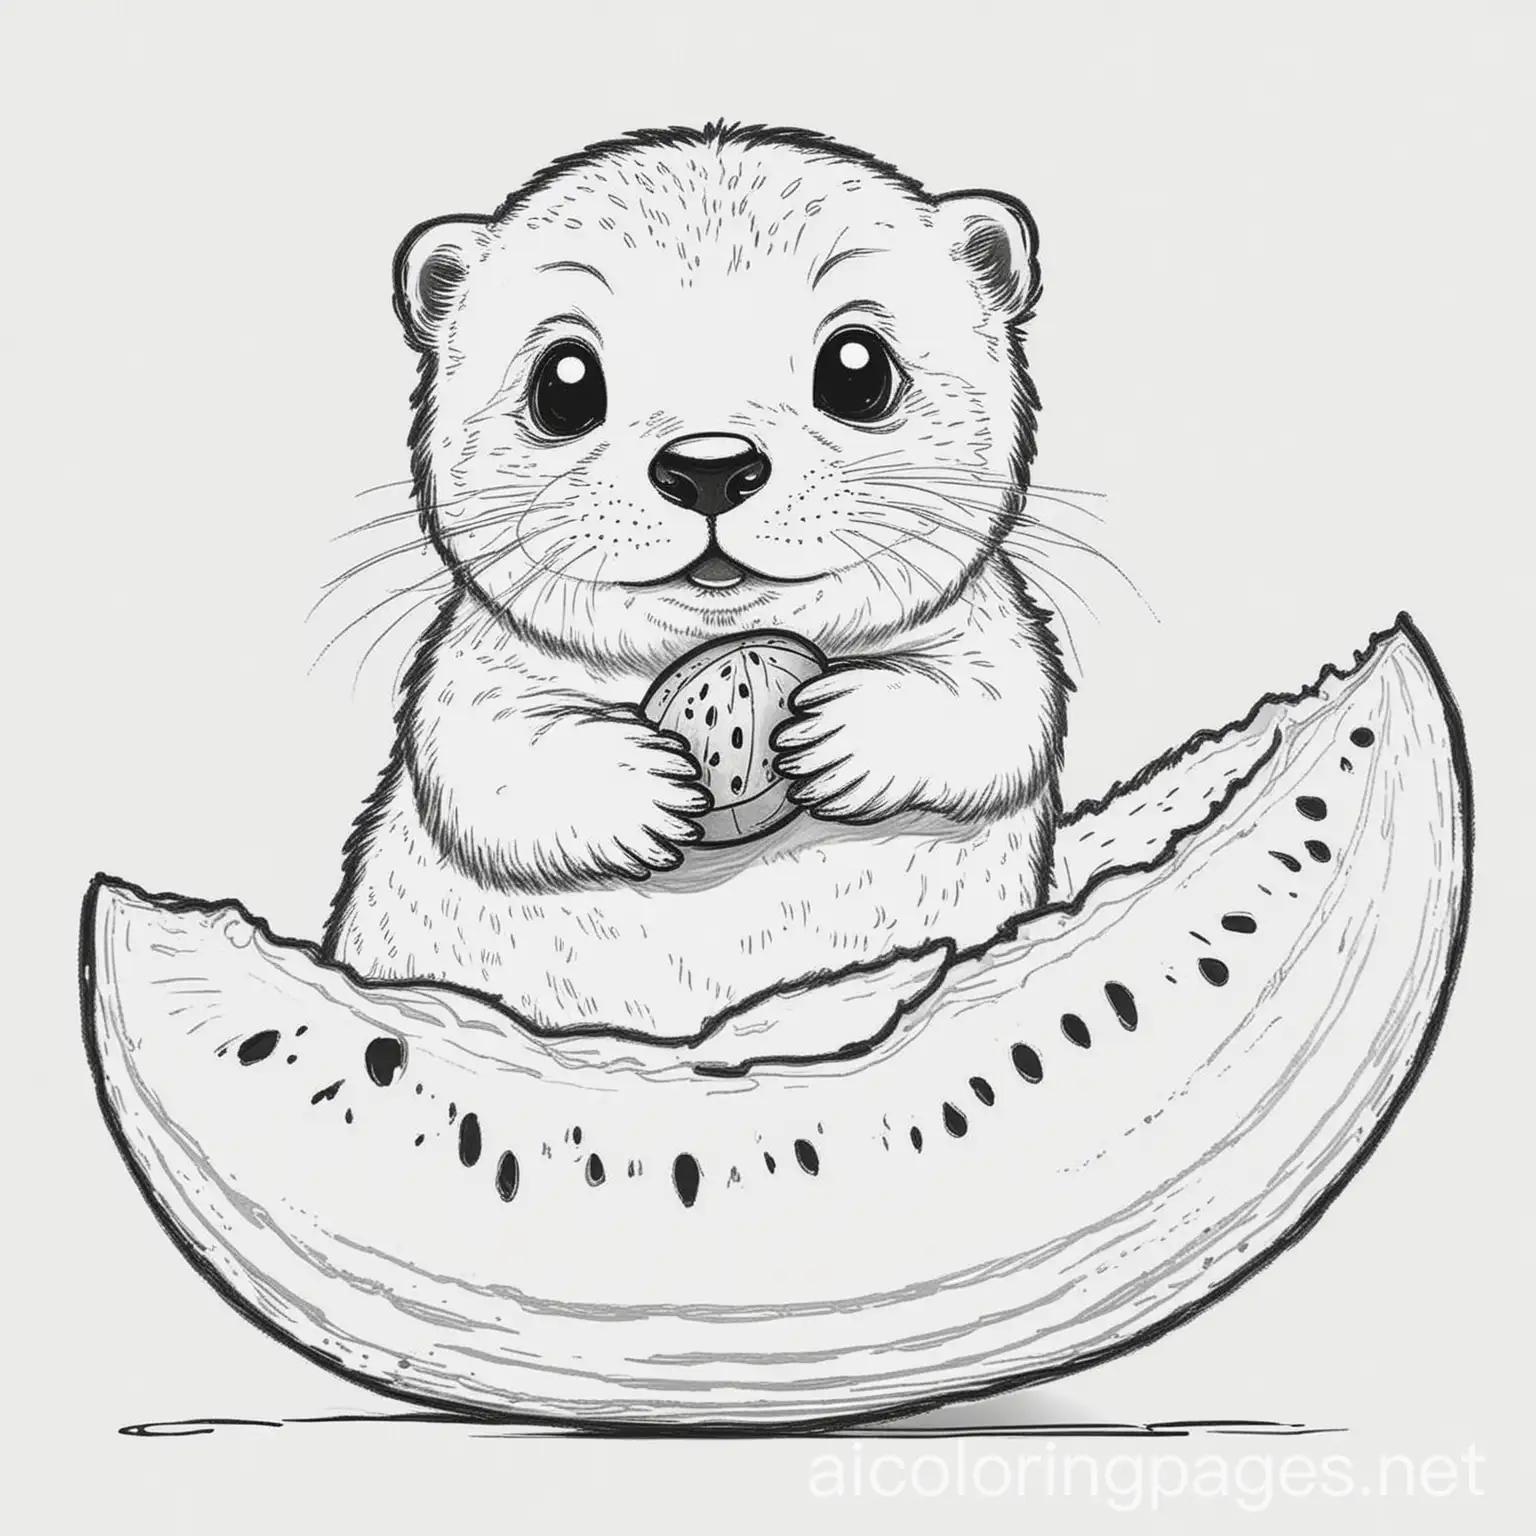 A cute baby otter eating watermelon, Coloring Page, black and white, line art, white background, Simplicity, Ample White Space. The background of the coloring page is plain white to make it easy for young children to color within the lines. The outlines of all the subjects are easy to distinguish, making it simple for kids to color without too much difficulty